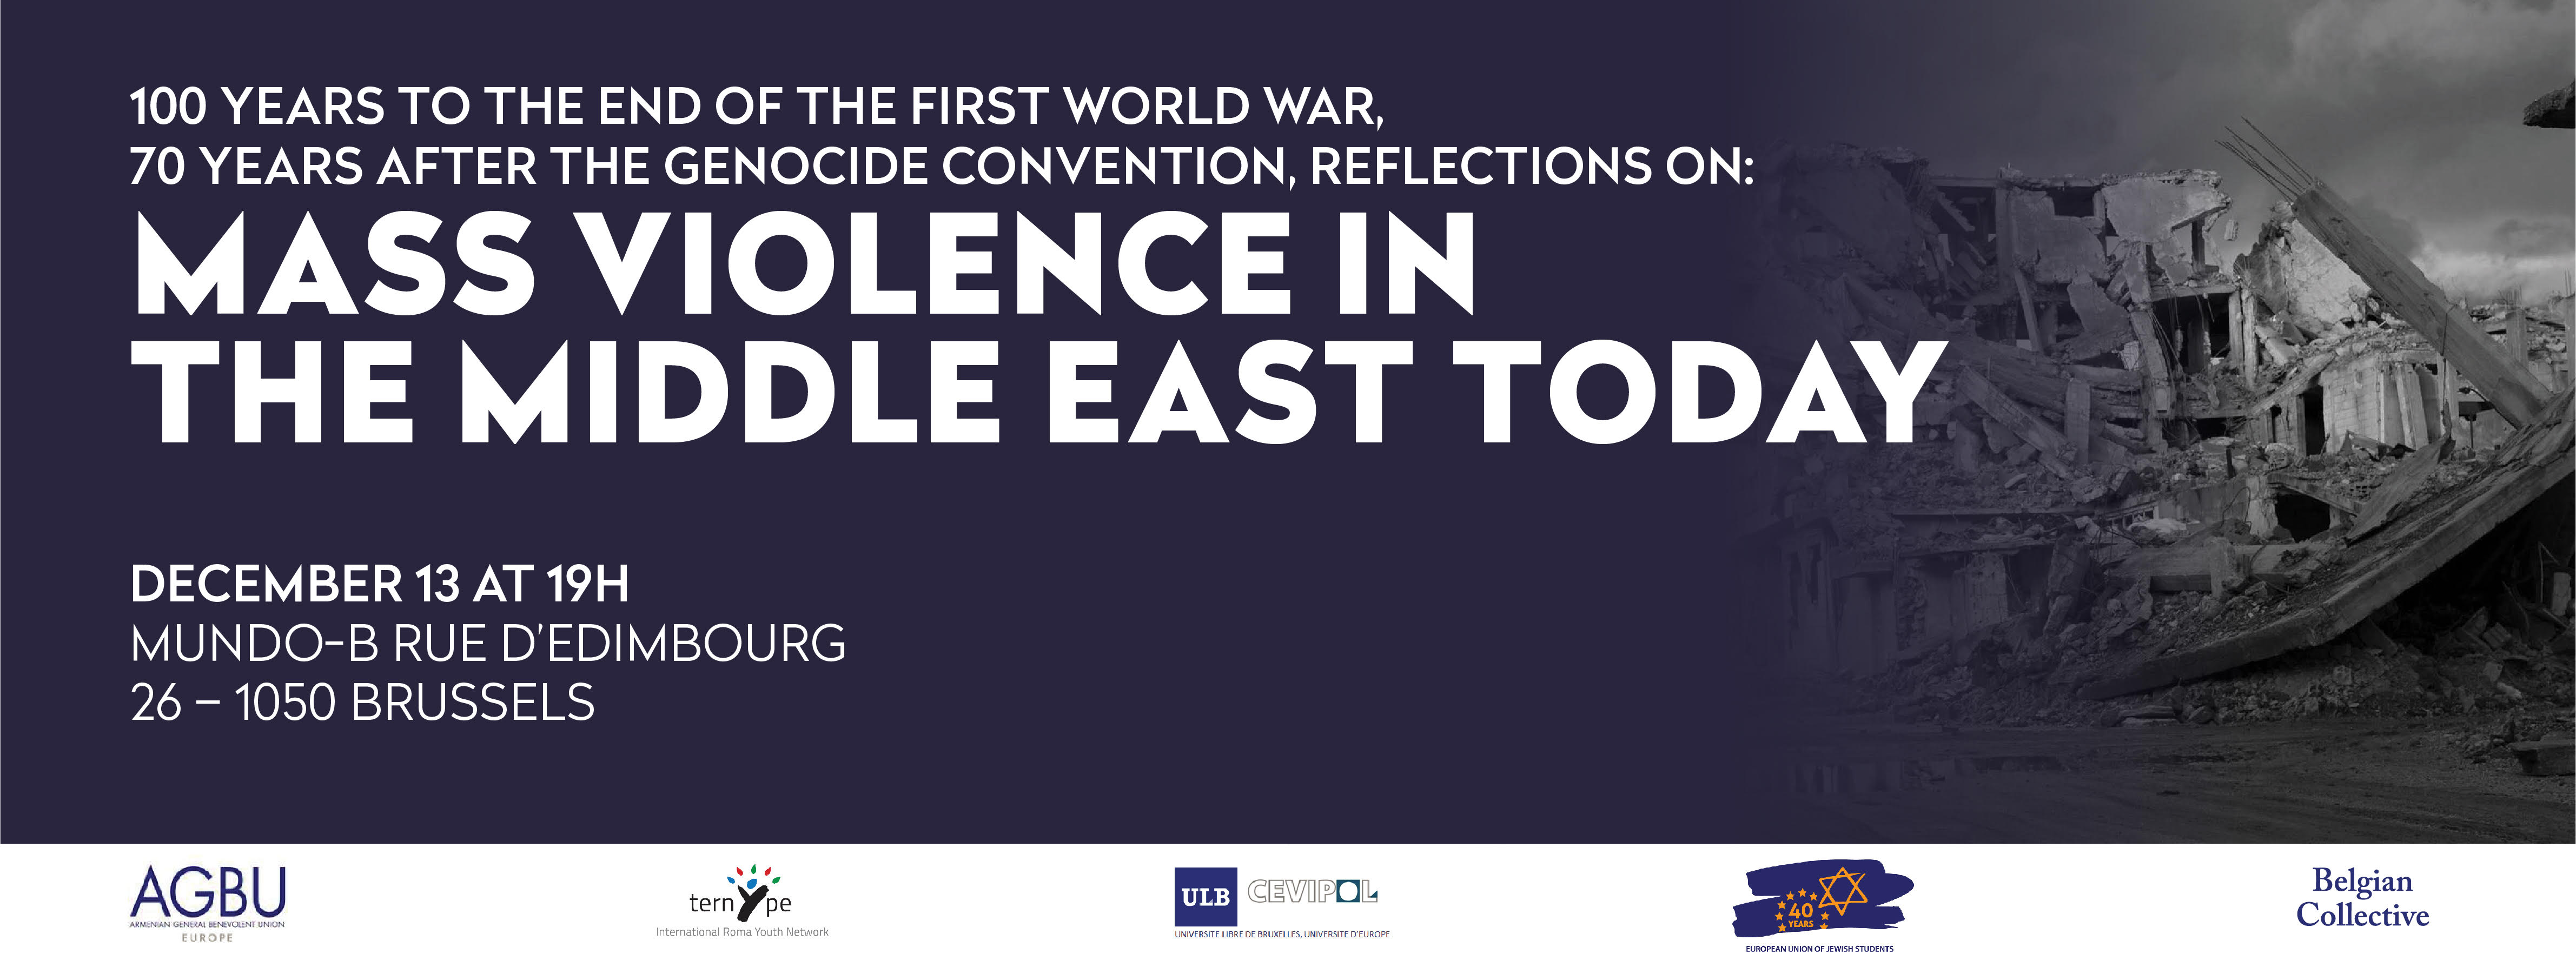 Mass Violence in the Middle East Today – Conference in Brussels, Belgium